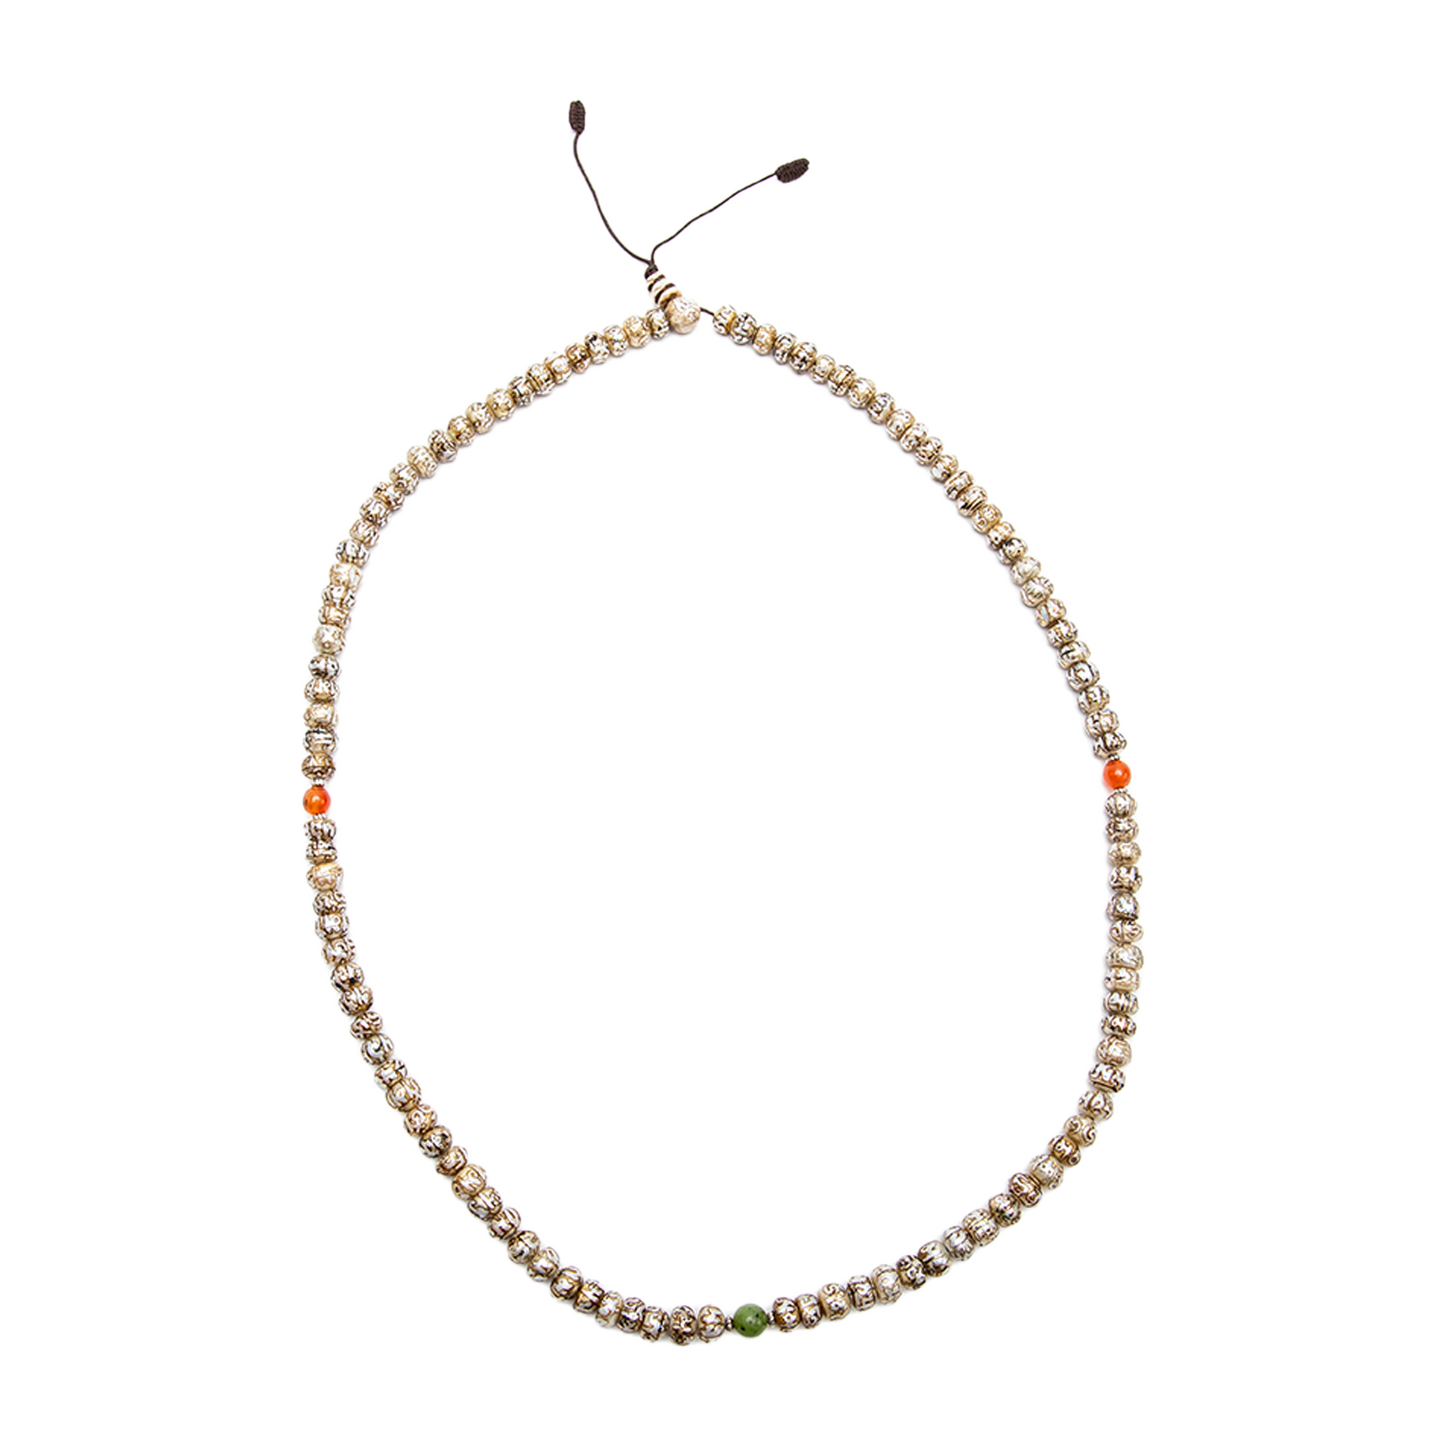 The Fresh Water Pearl Mala rests on a solid white backdrop. It is laid flat to form a perfect oval.